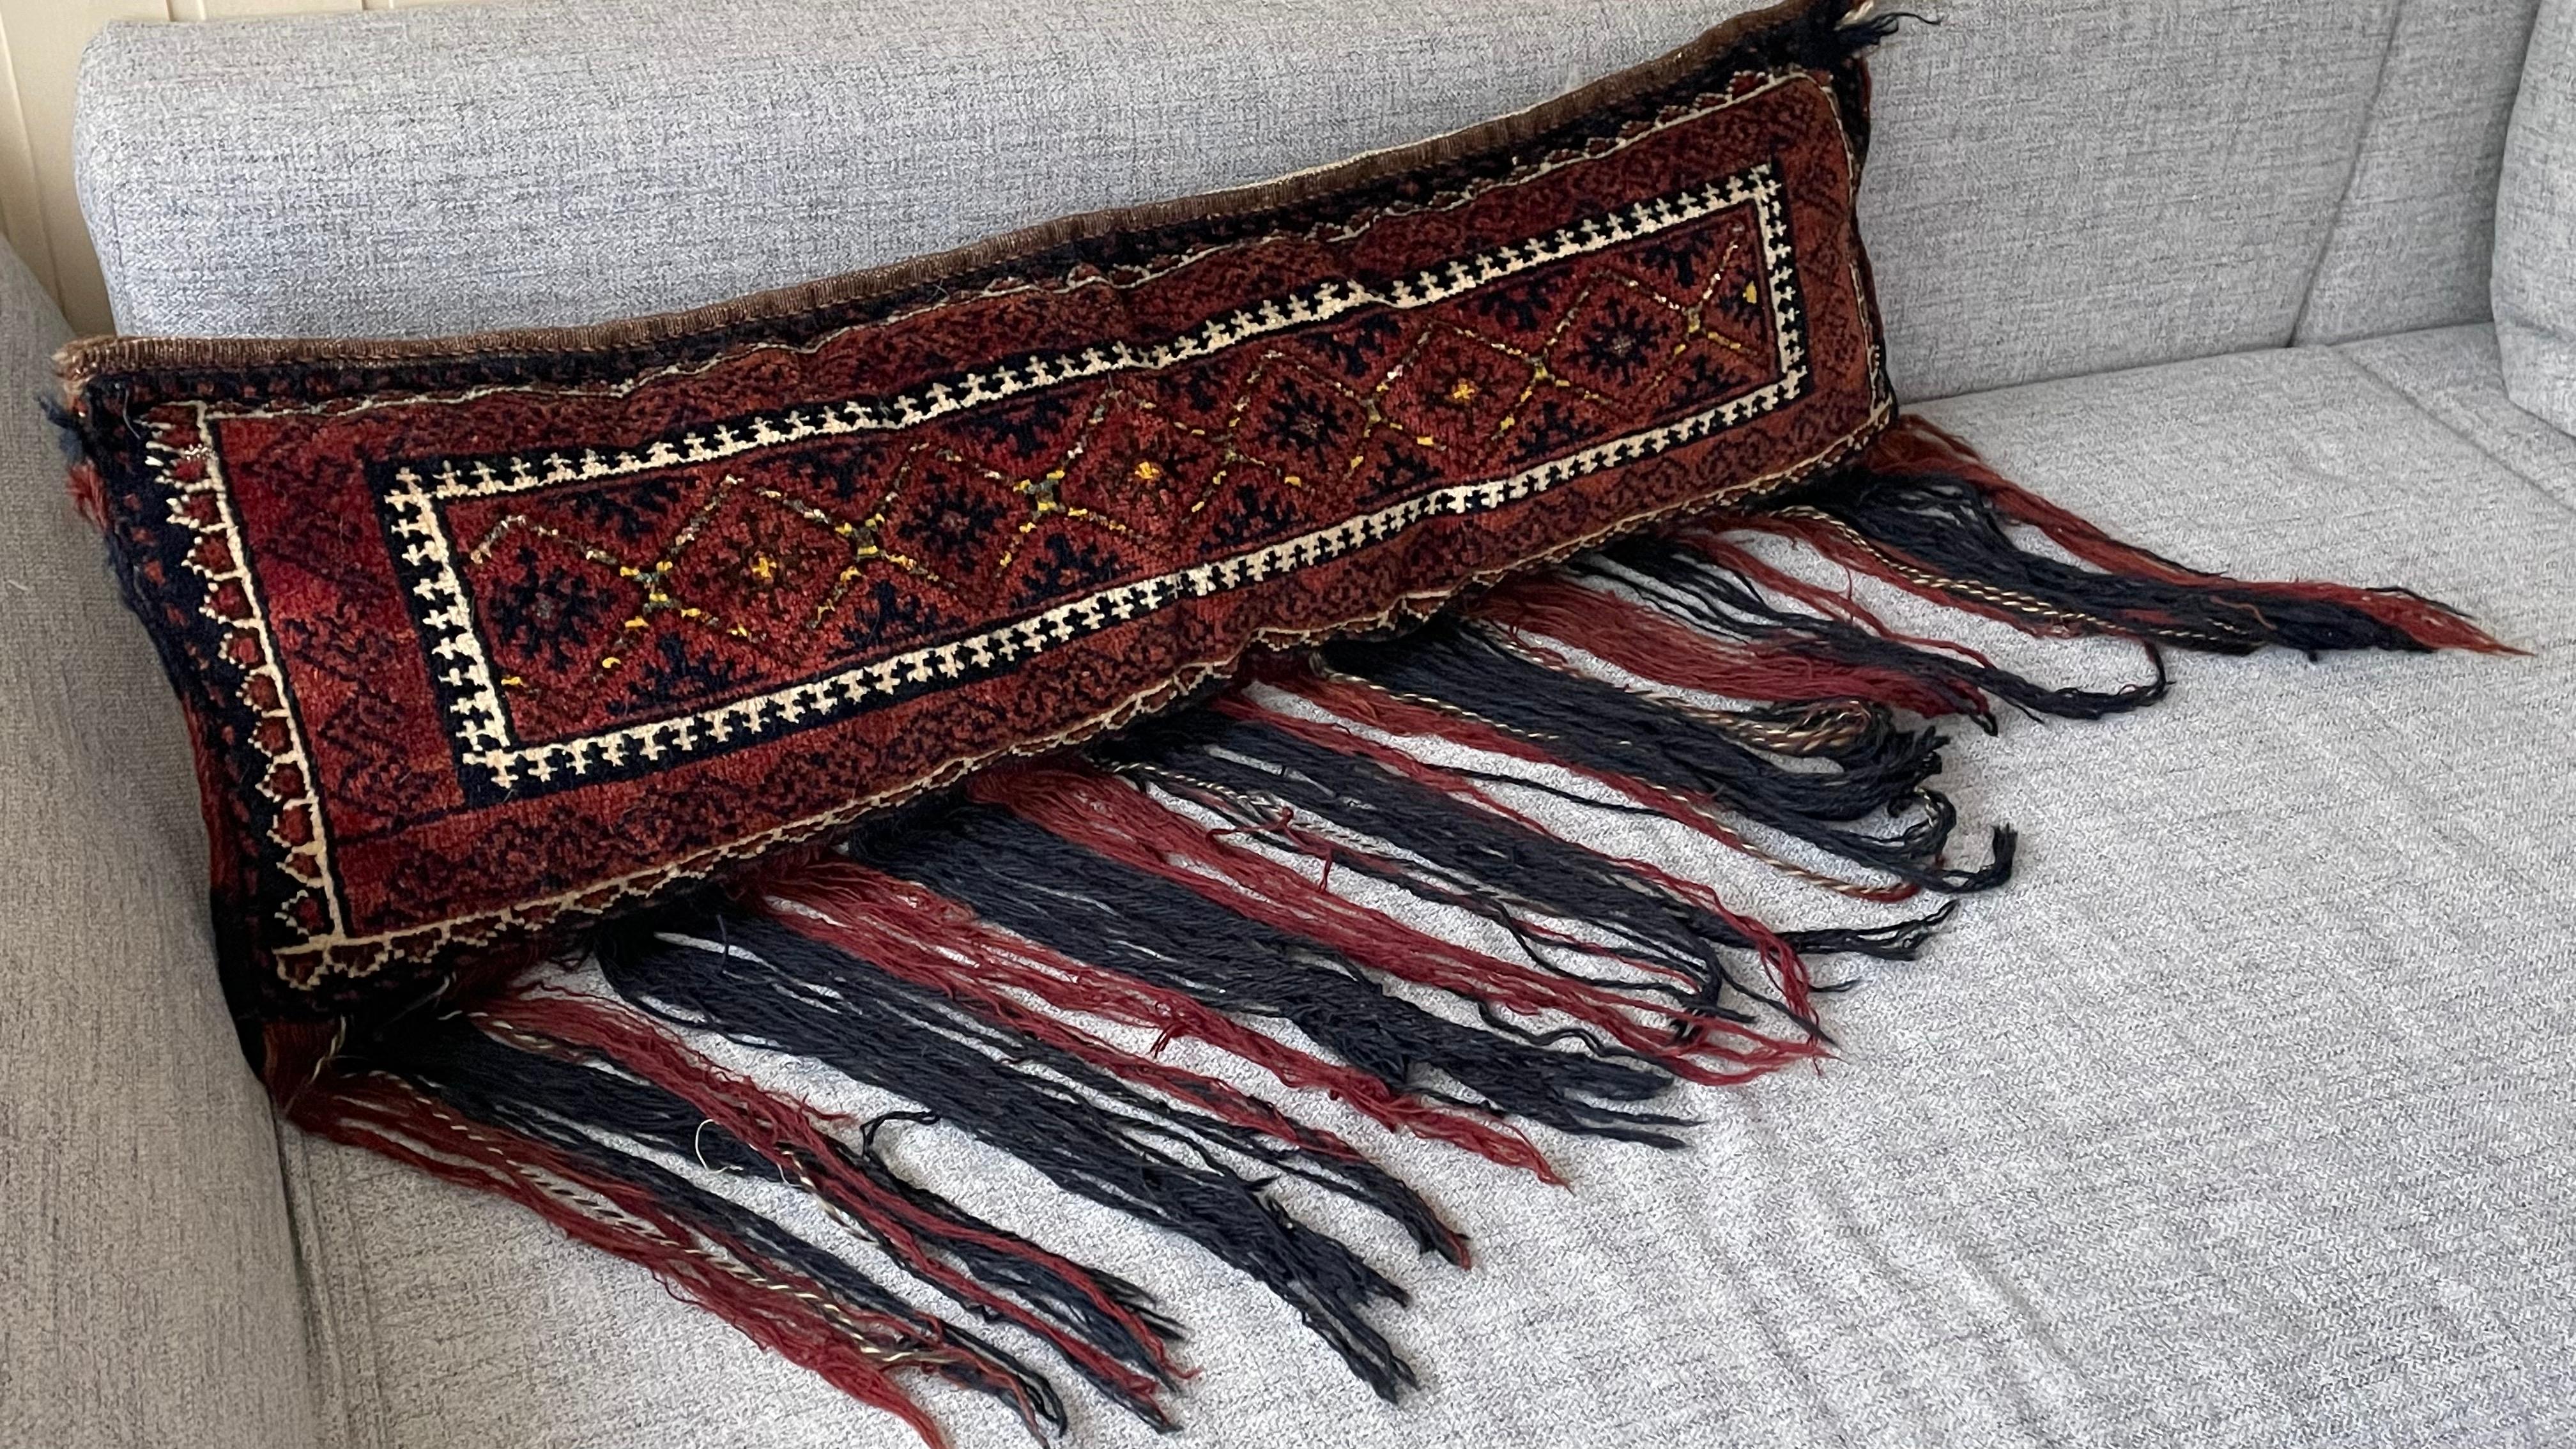 Gorgeous oriental pillow or seat pillow. Handmade of woolen salt bag or Oriental rug. A beautiful item to put on your leather sofa or a bench. The height including the fringes is approx. 24